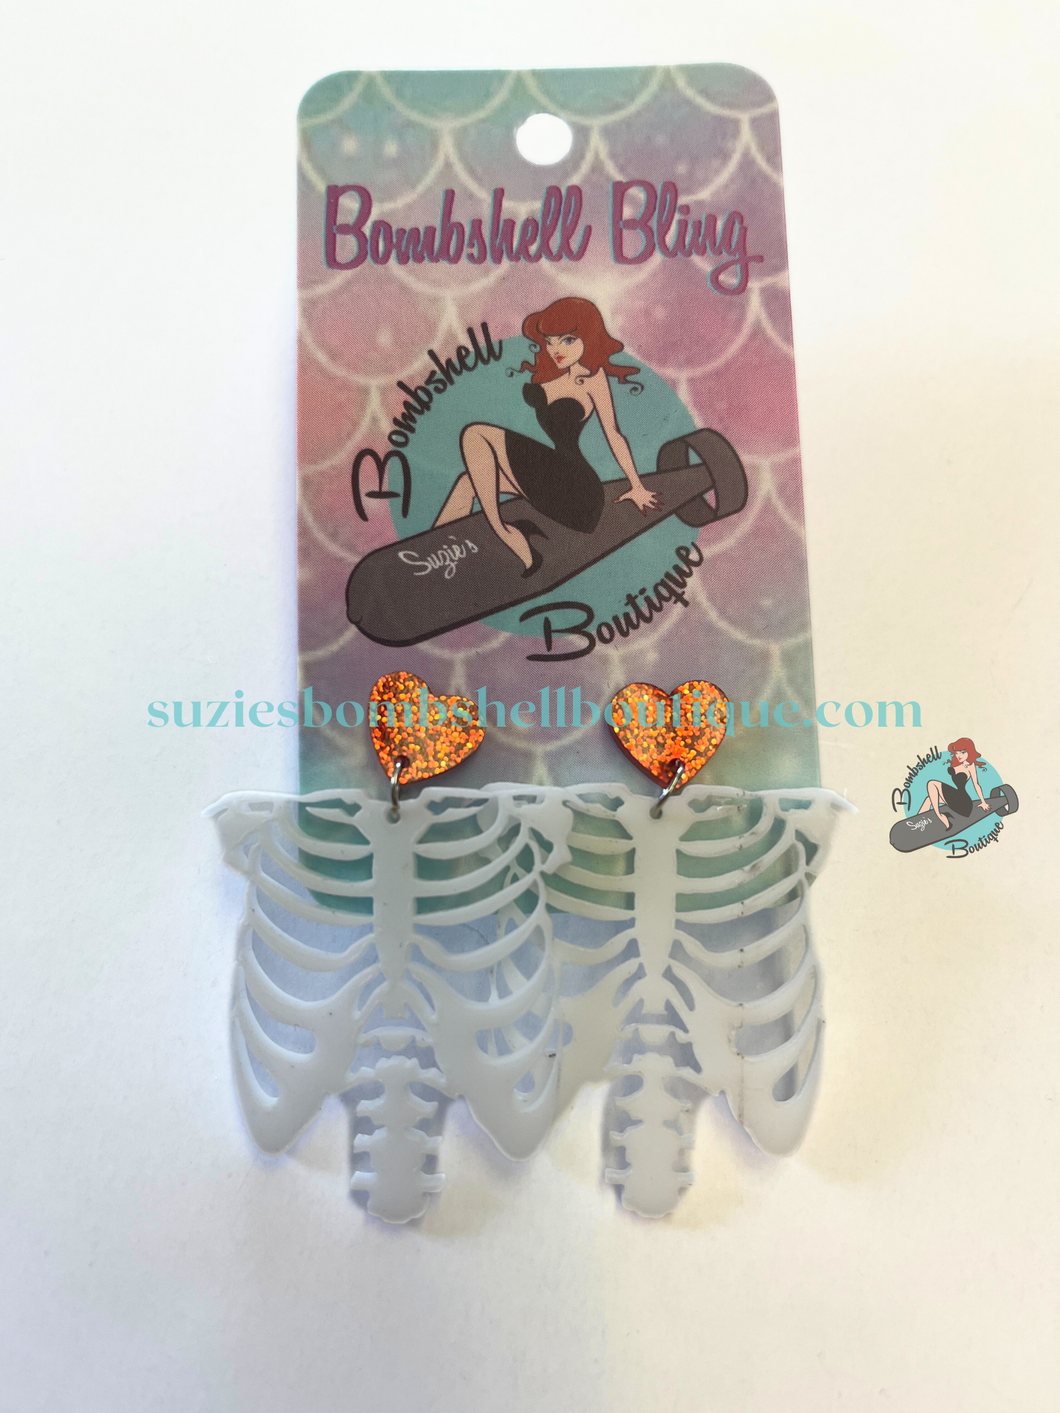 Bombshell Bling Skinny Love Earrings acrylic earrings of skeleton hanging from sparkly red hearts goth pinup halloween altfashion resin costume jewellery Canadian Pin-Up Shop Suzie's Bombshell Boutique